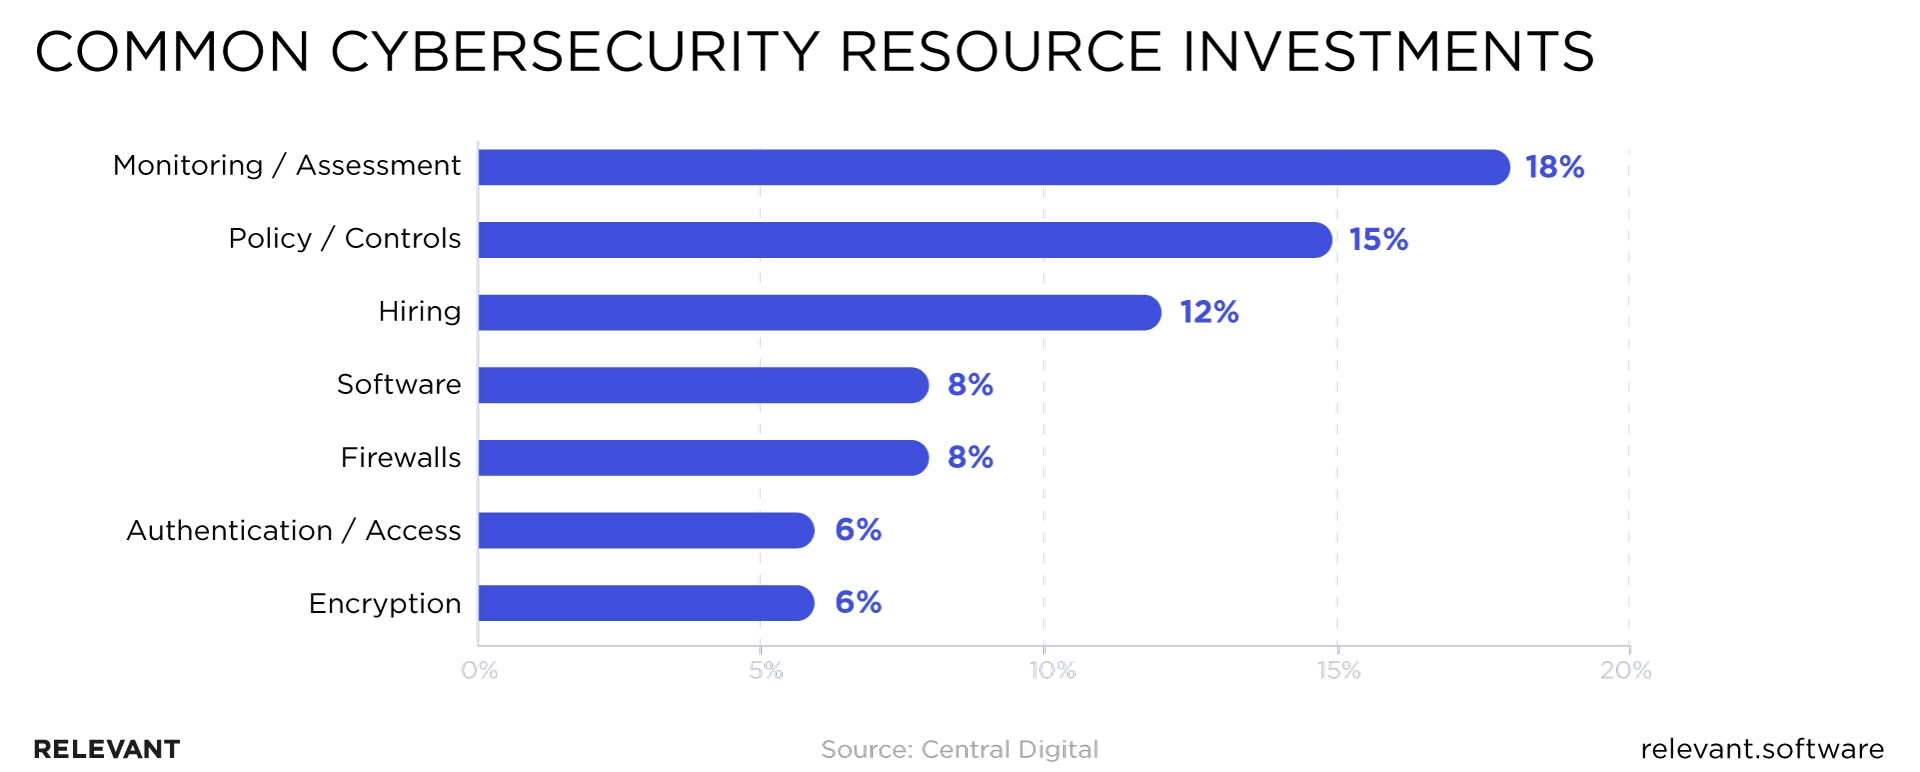 Cybersecurity resource investments